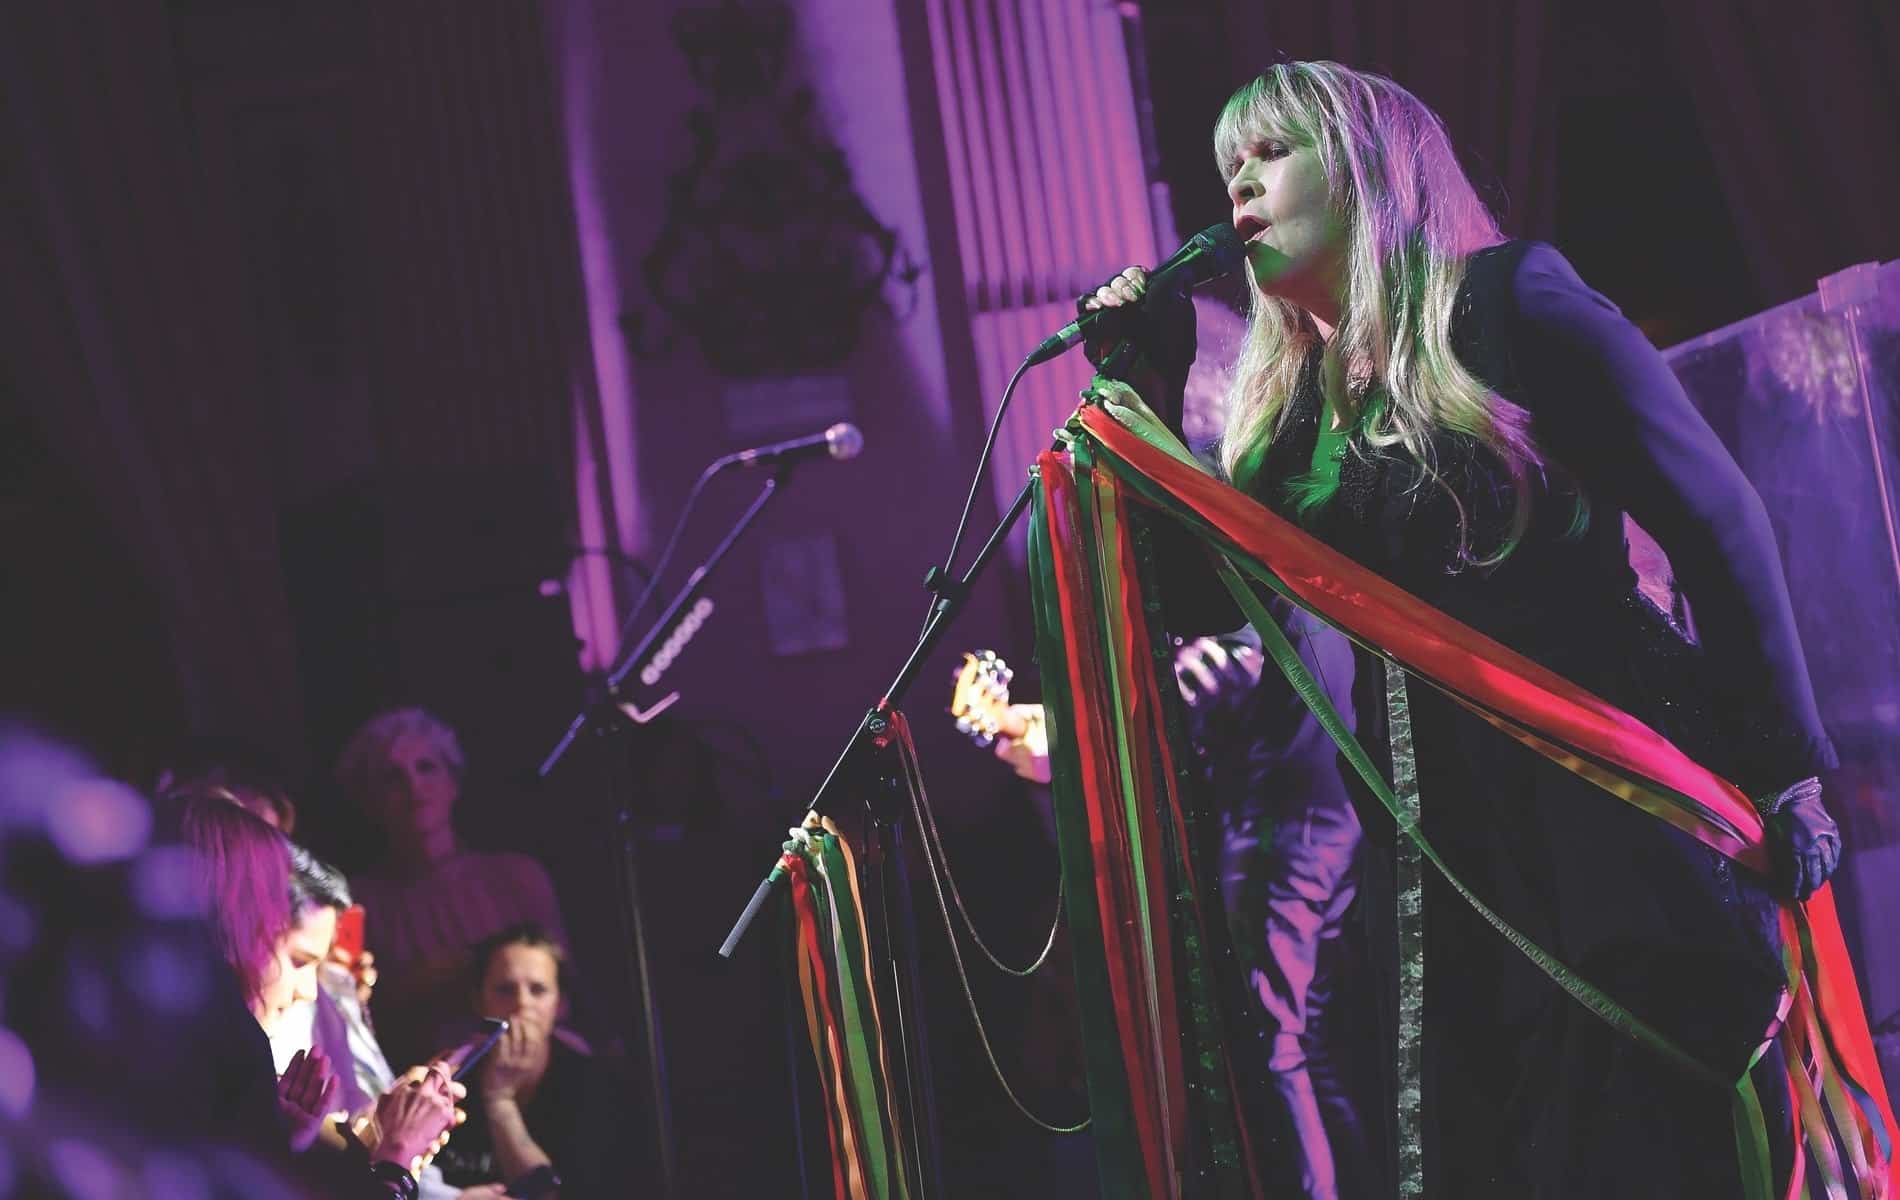 Gucci Cruise 2020 Runway Show & After Party, Stevie Nicks